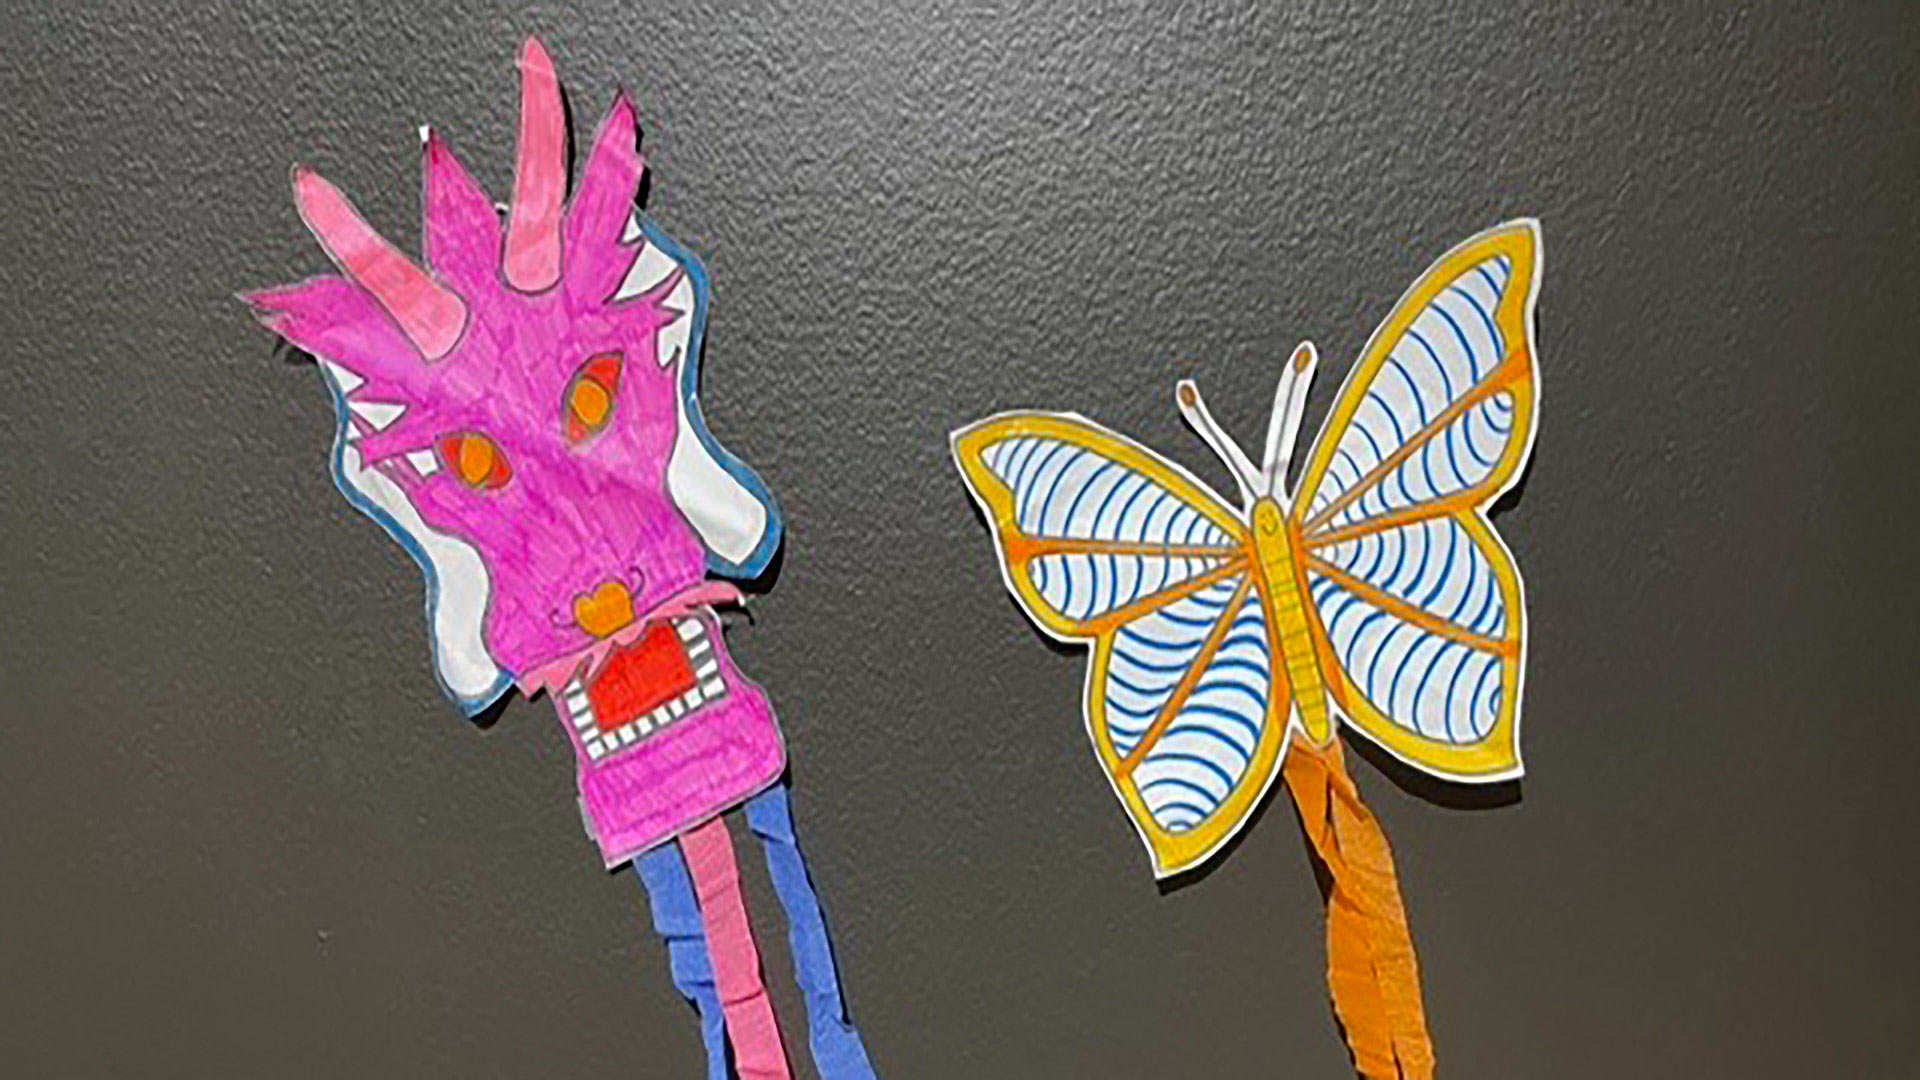 pink paper kite in the shape of a dragon face with blue and pink streamers, next to an orange butterfly kite with orange streamers